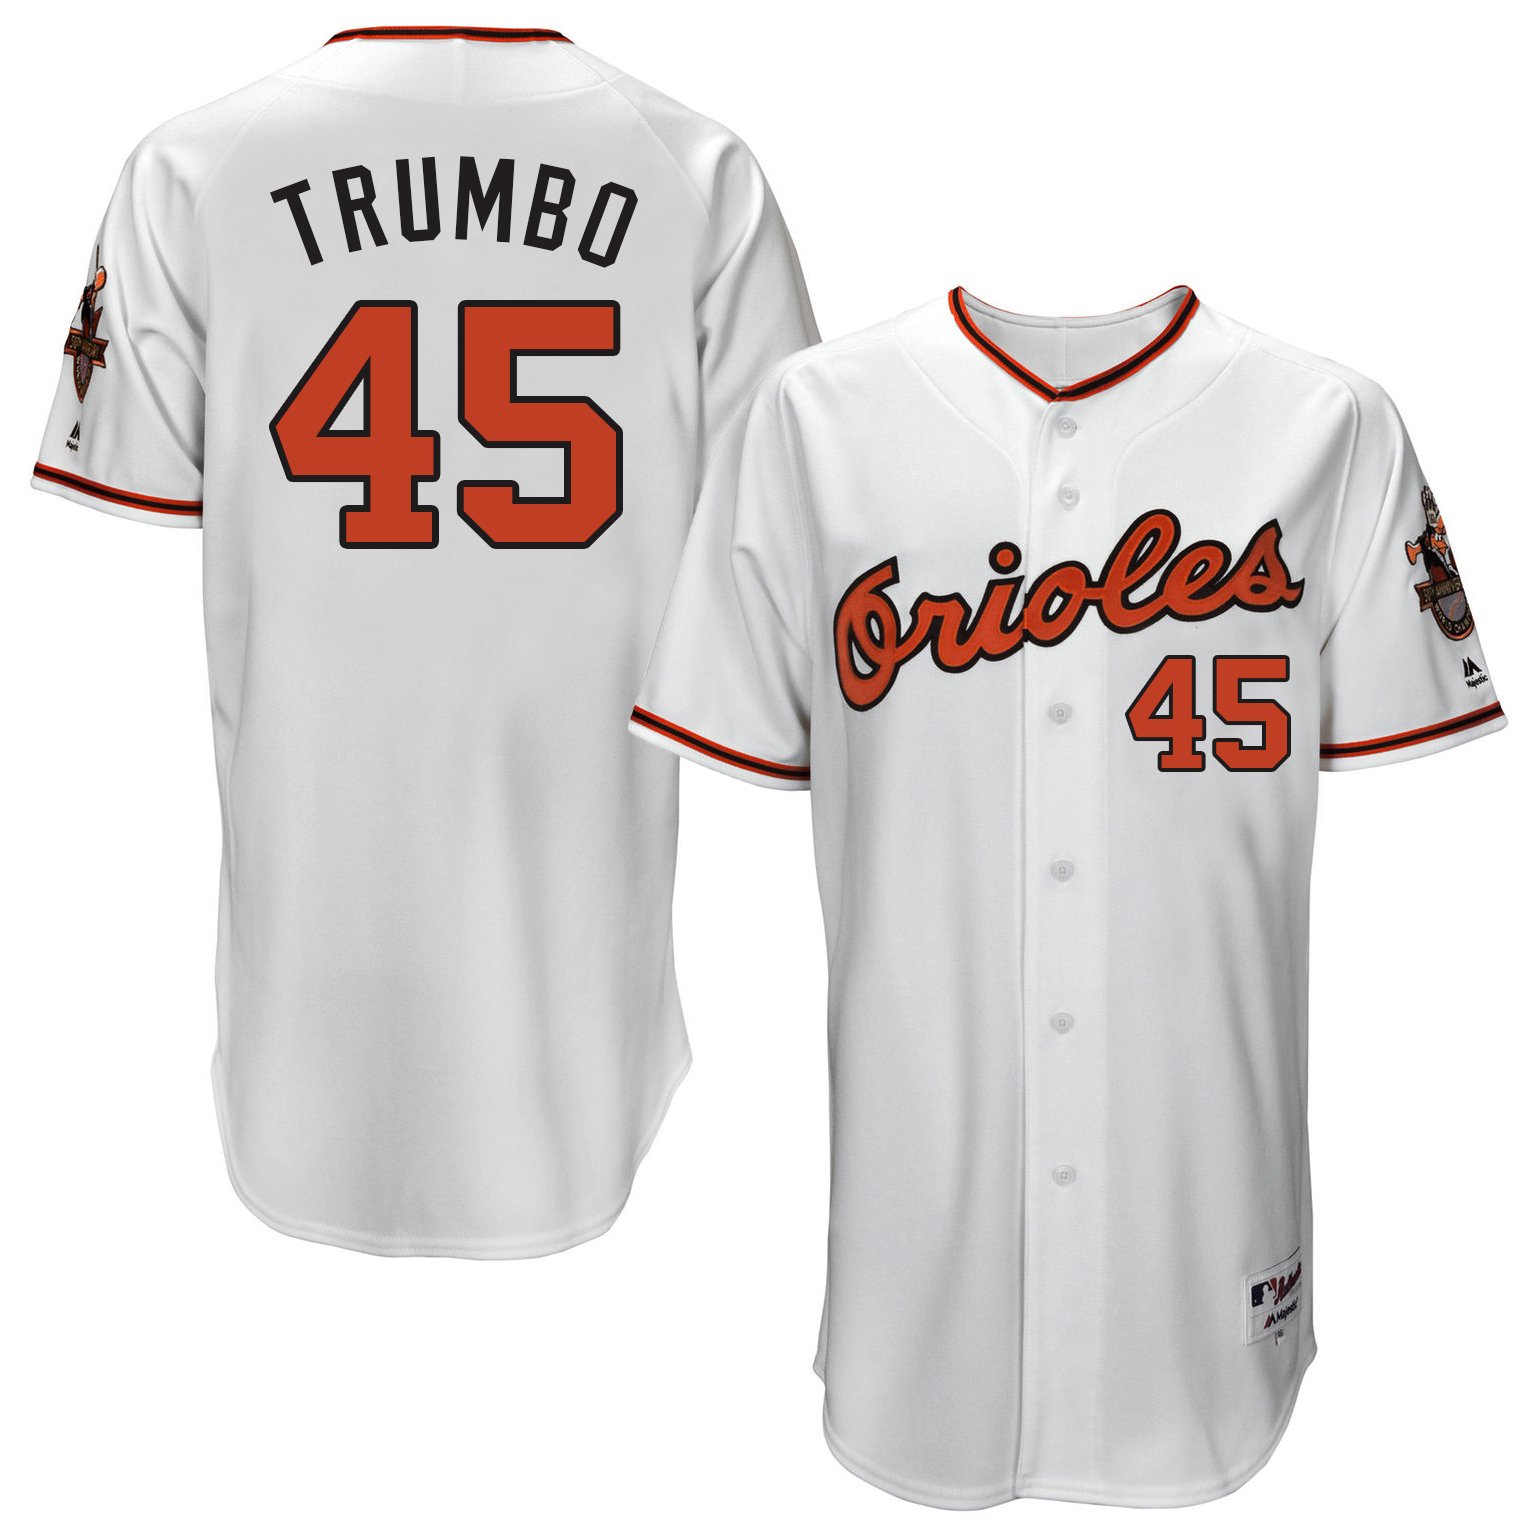 Orioles 45 Mark Trumbo White Throwback Jersey